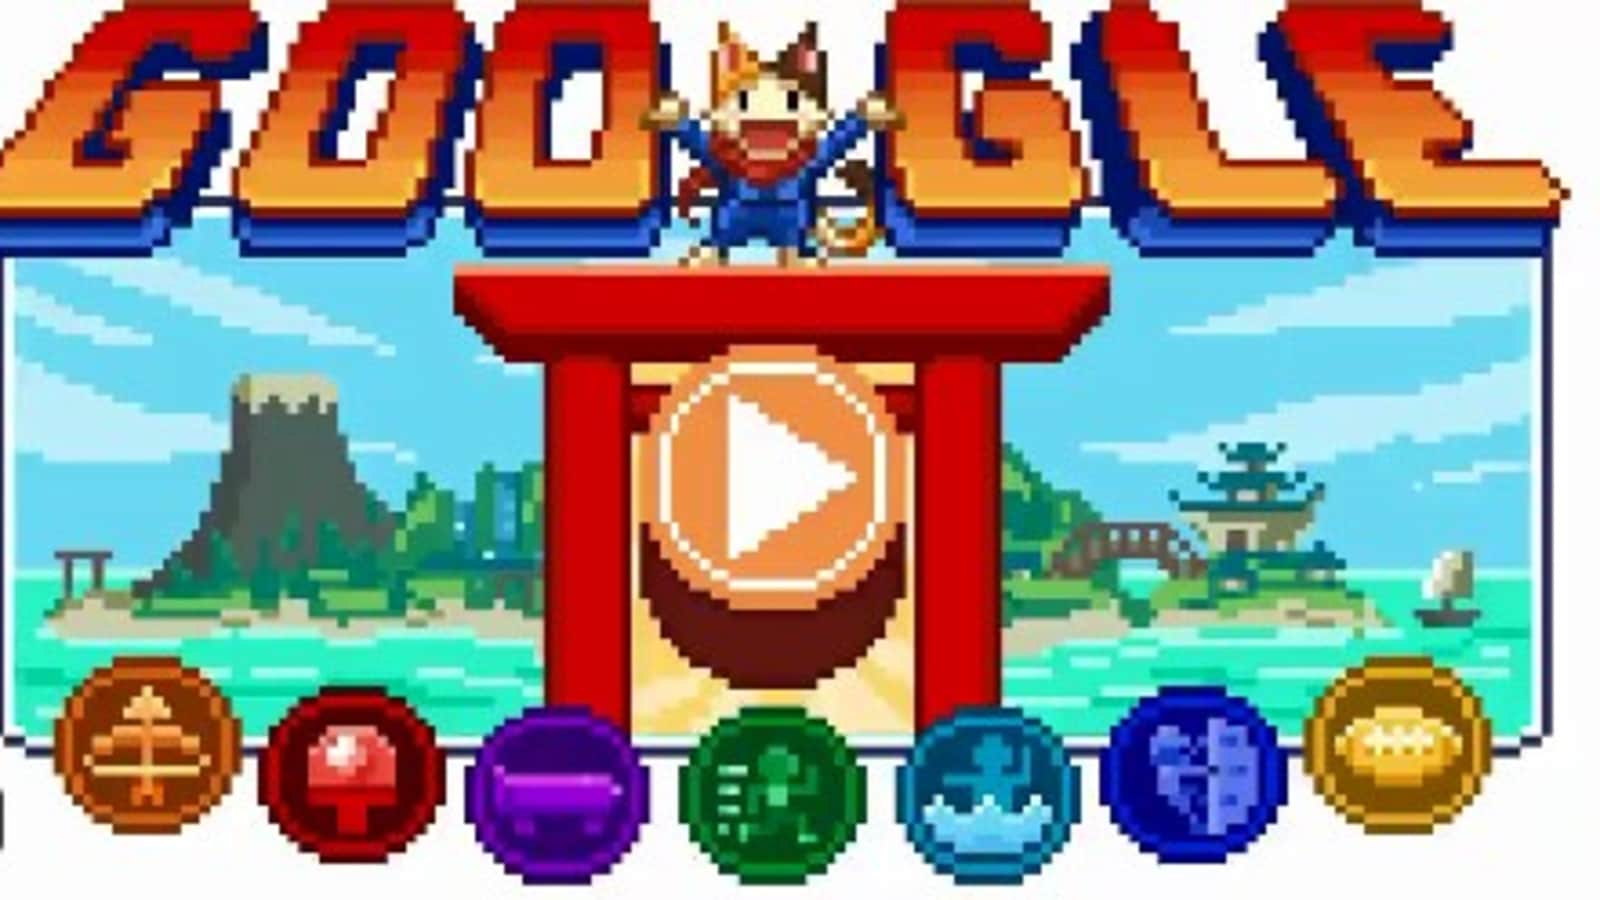 Google Doodle Olympics Google Launches Doodle Champion Island Games To ...